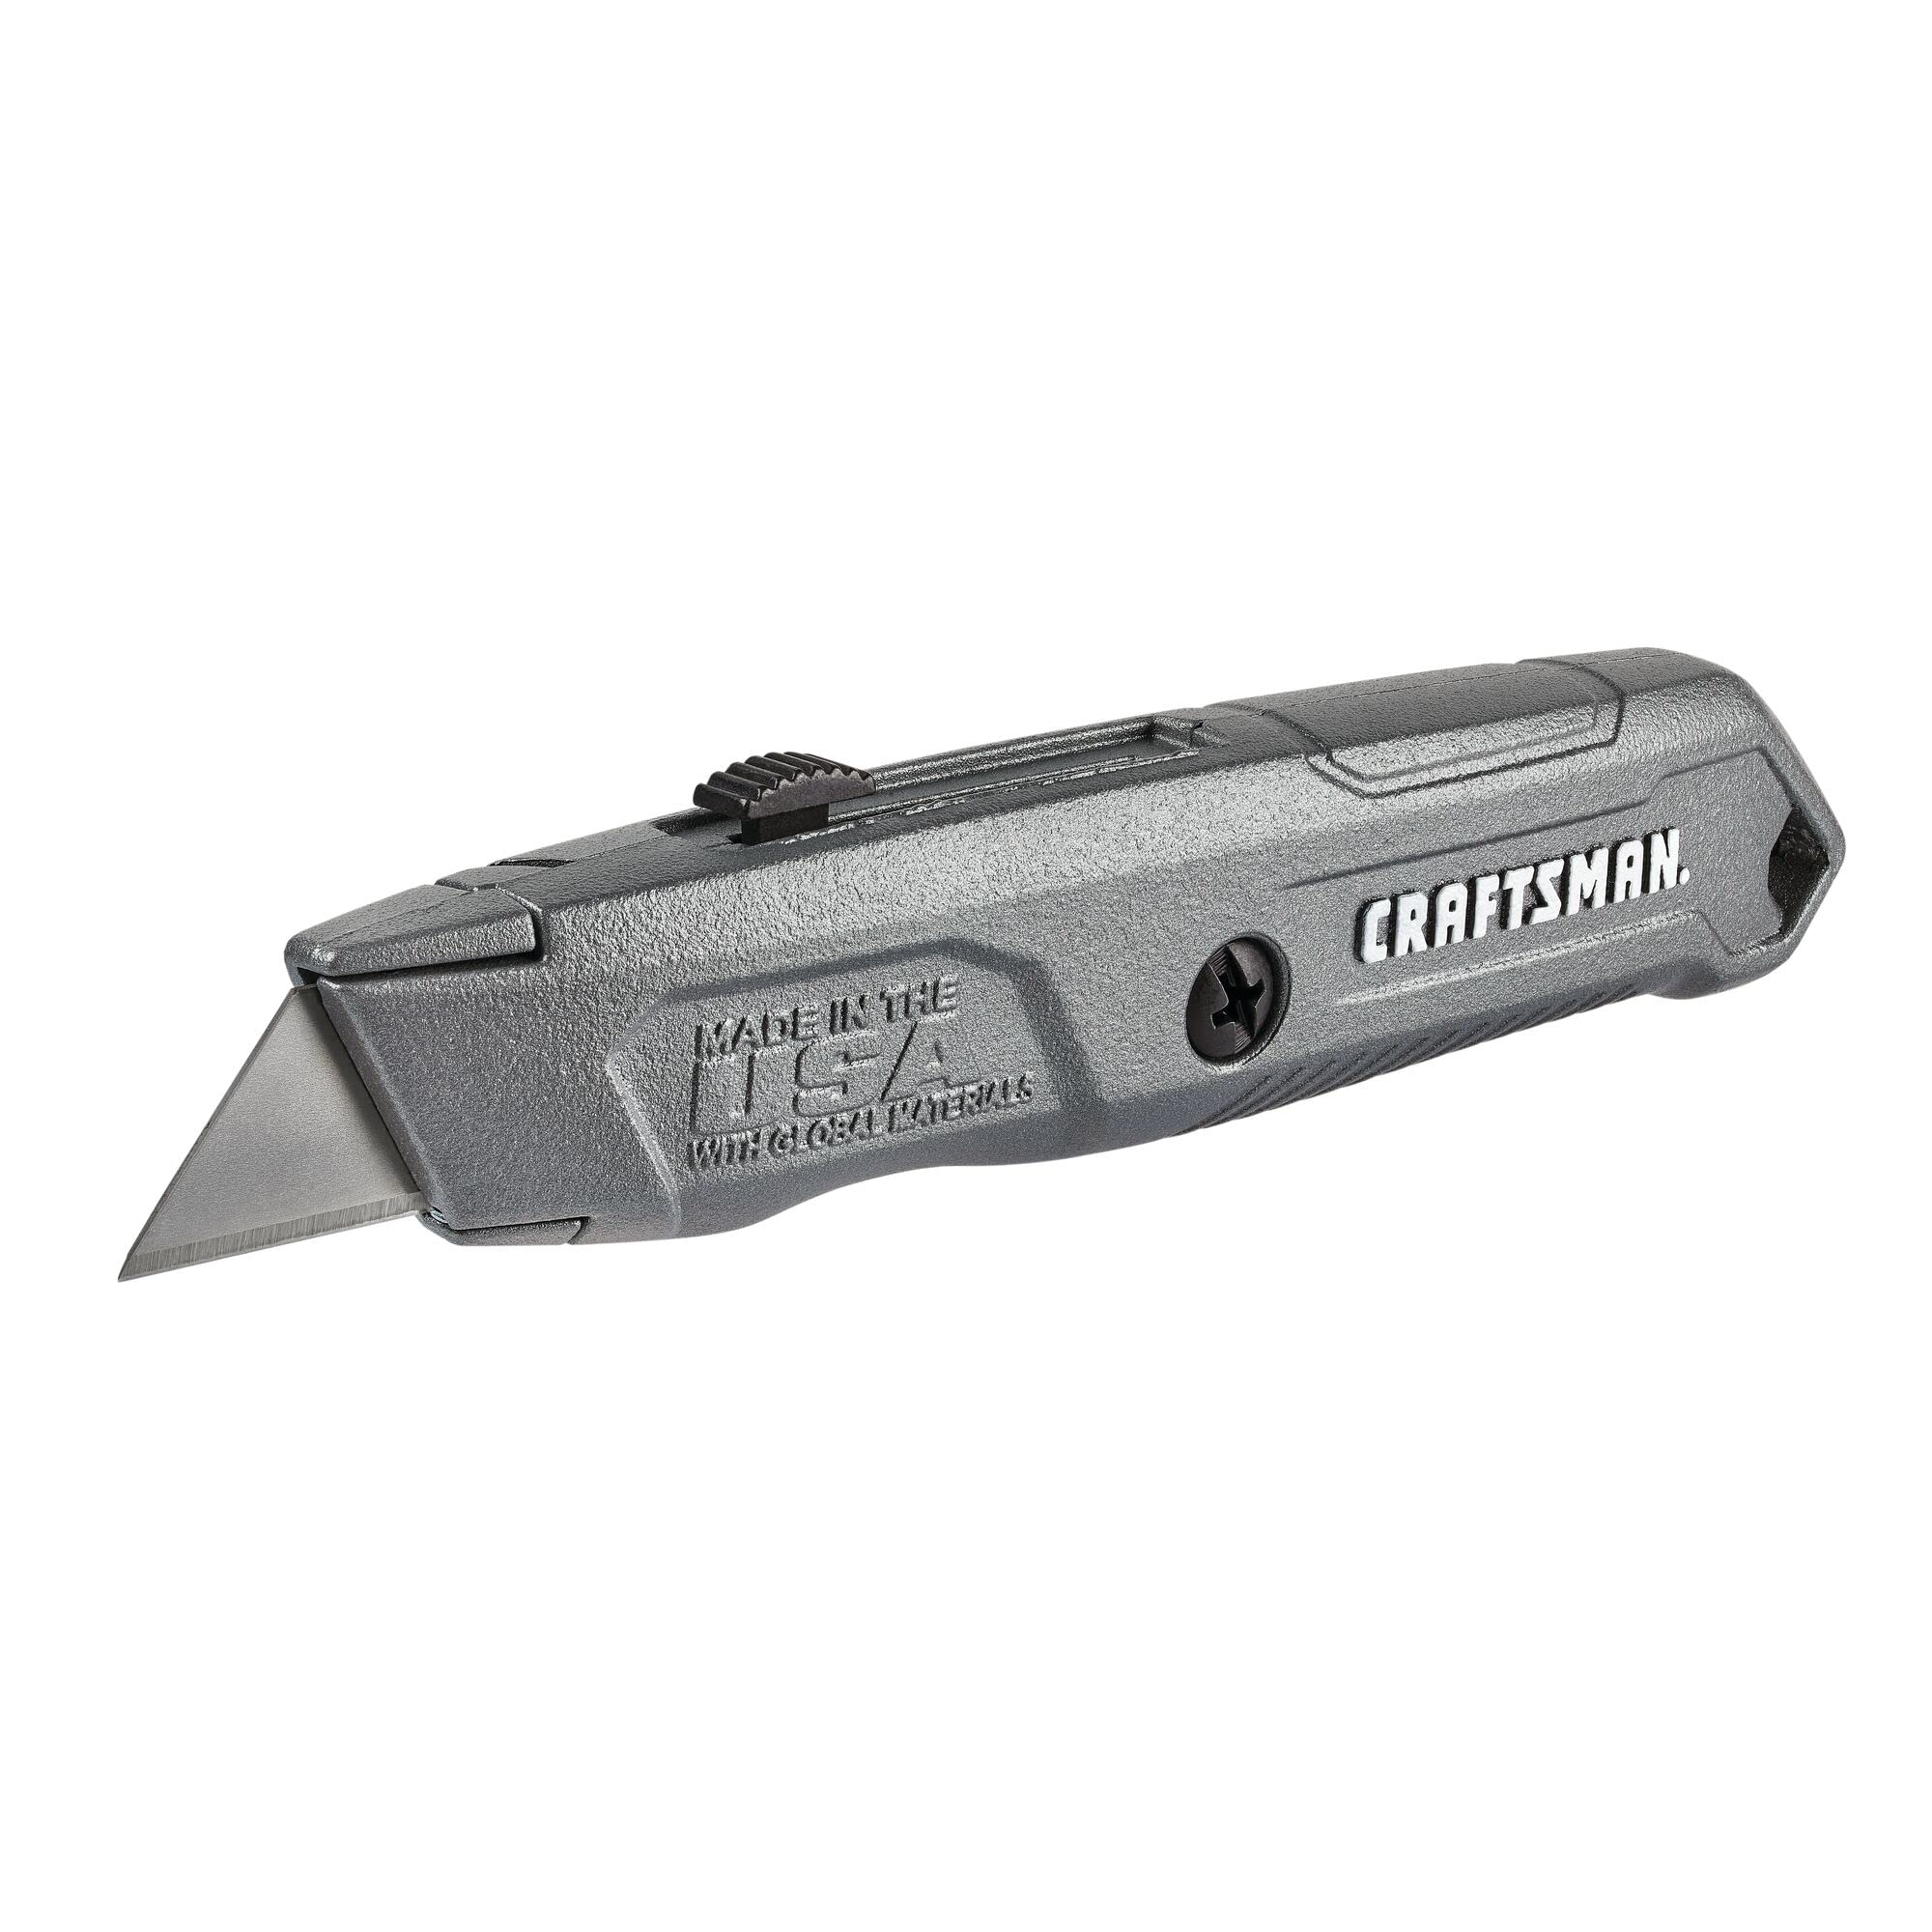 CRAFTSMAN Utility Knife, Retractable, 3 Blades Included (CMHT10585​)